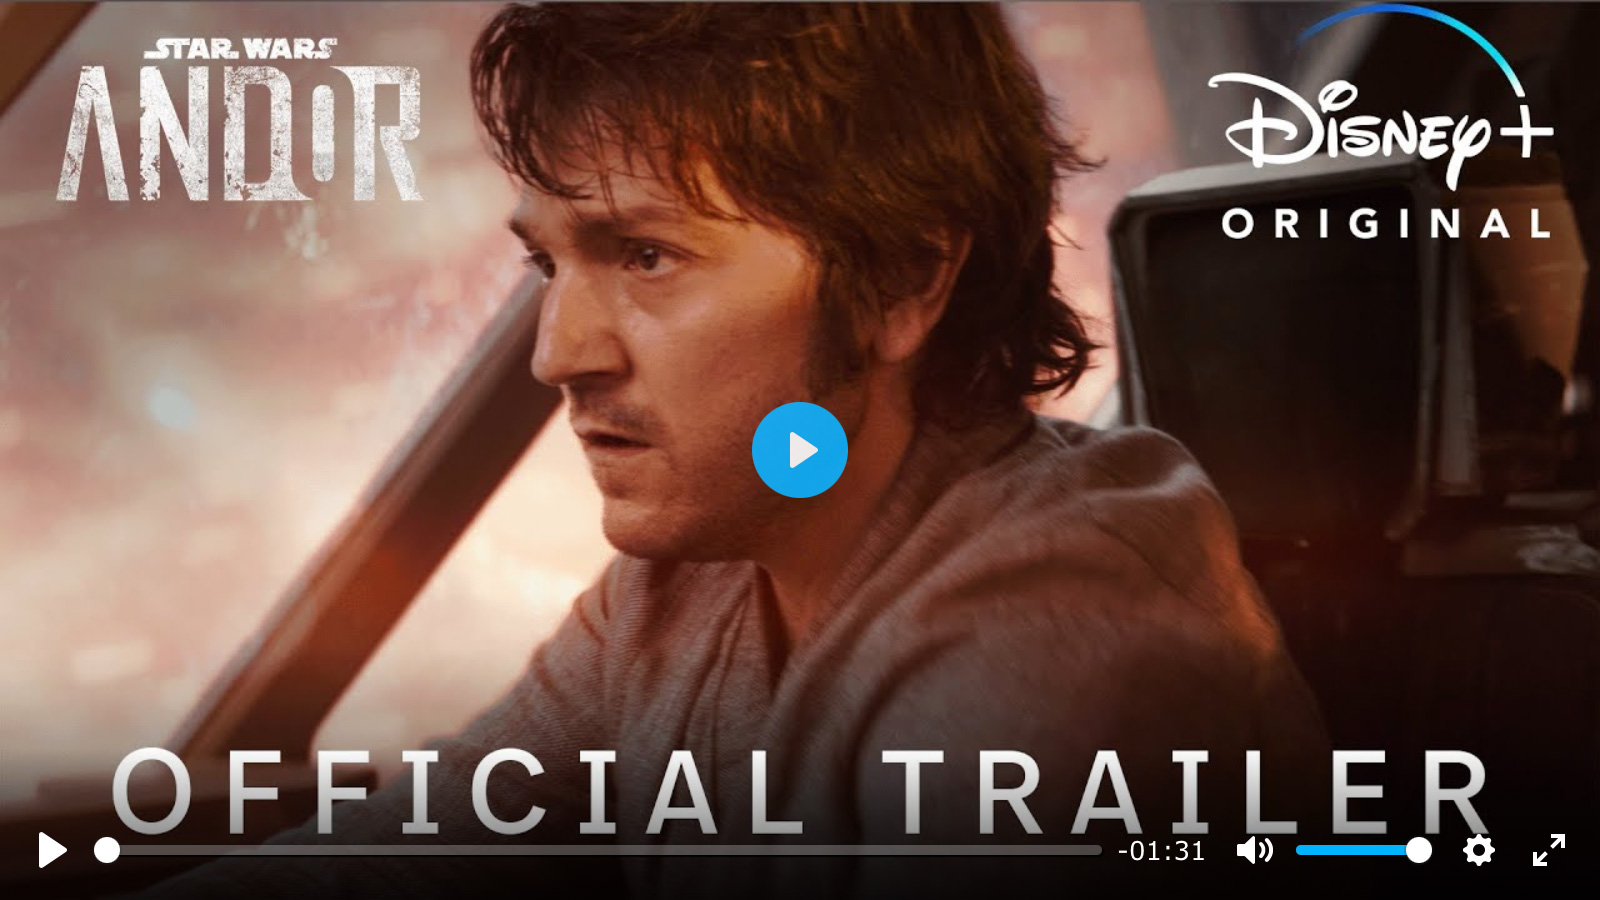 New Official Trailer - Star Wars: Andor